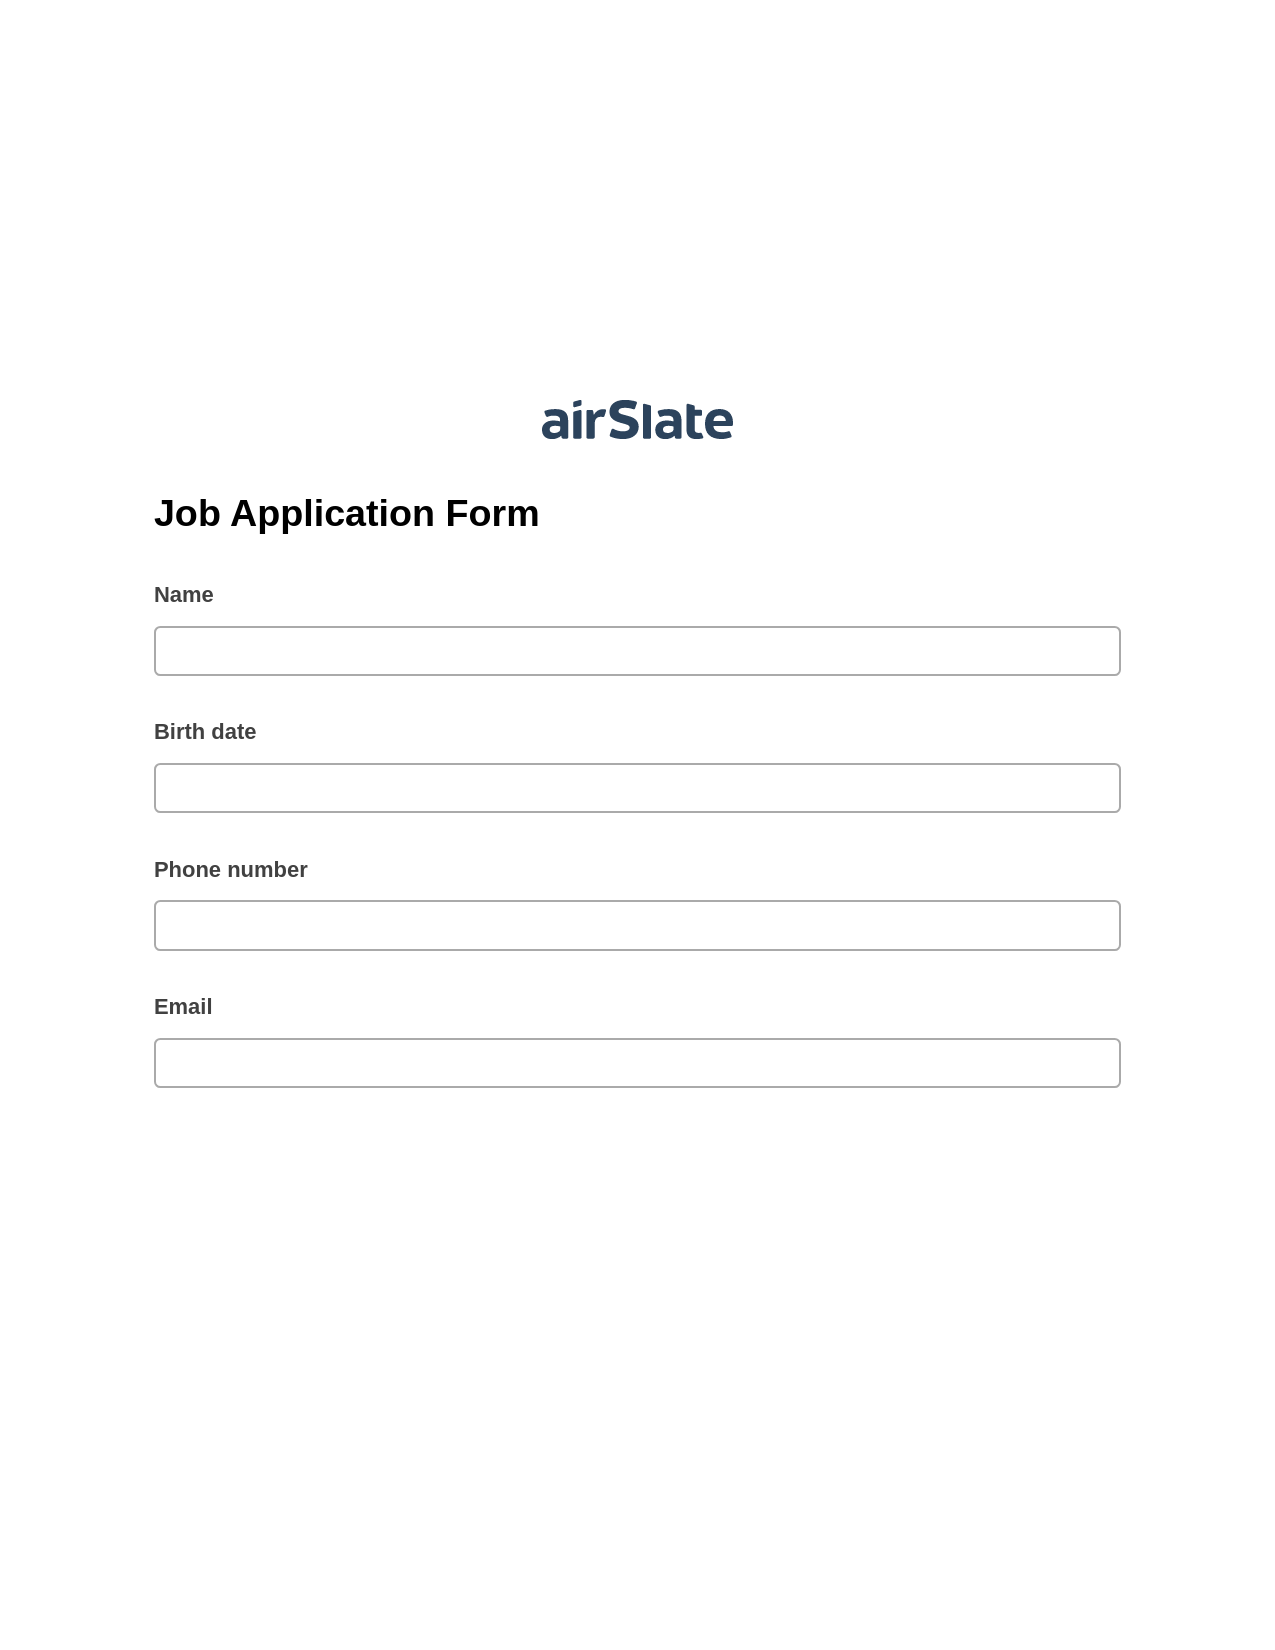 Job Application Form Pre-fill from Office 365 Excel Bot, Assign Roles to Recipients Bot, Webhook Postfinish Bot